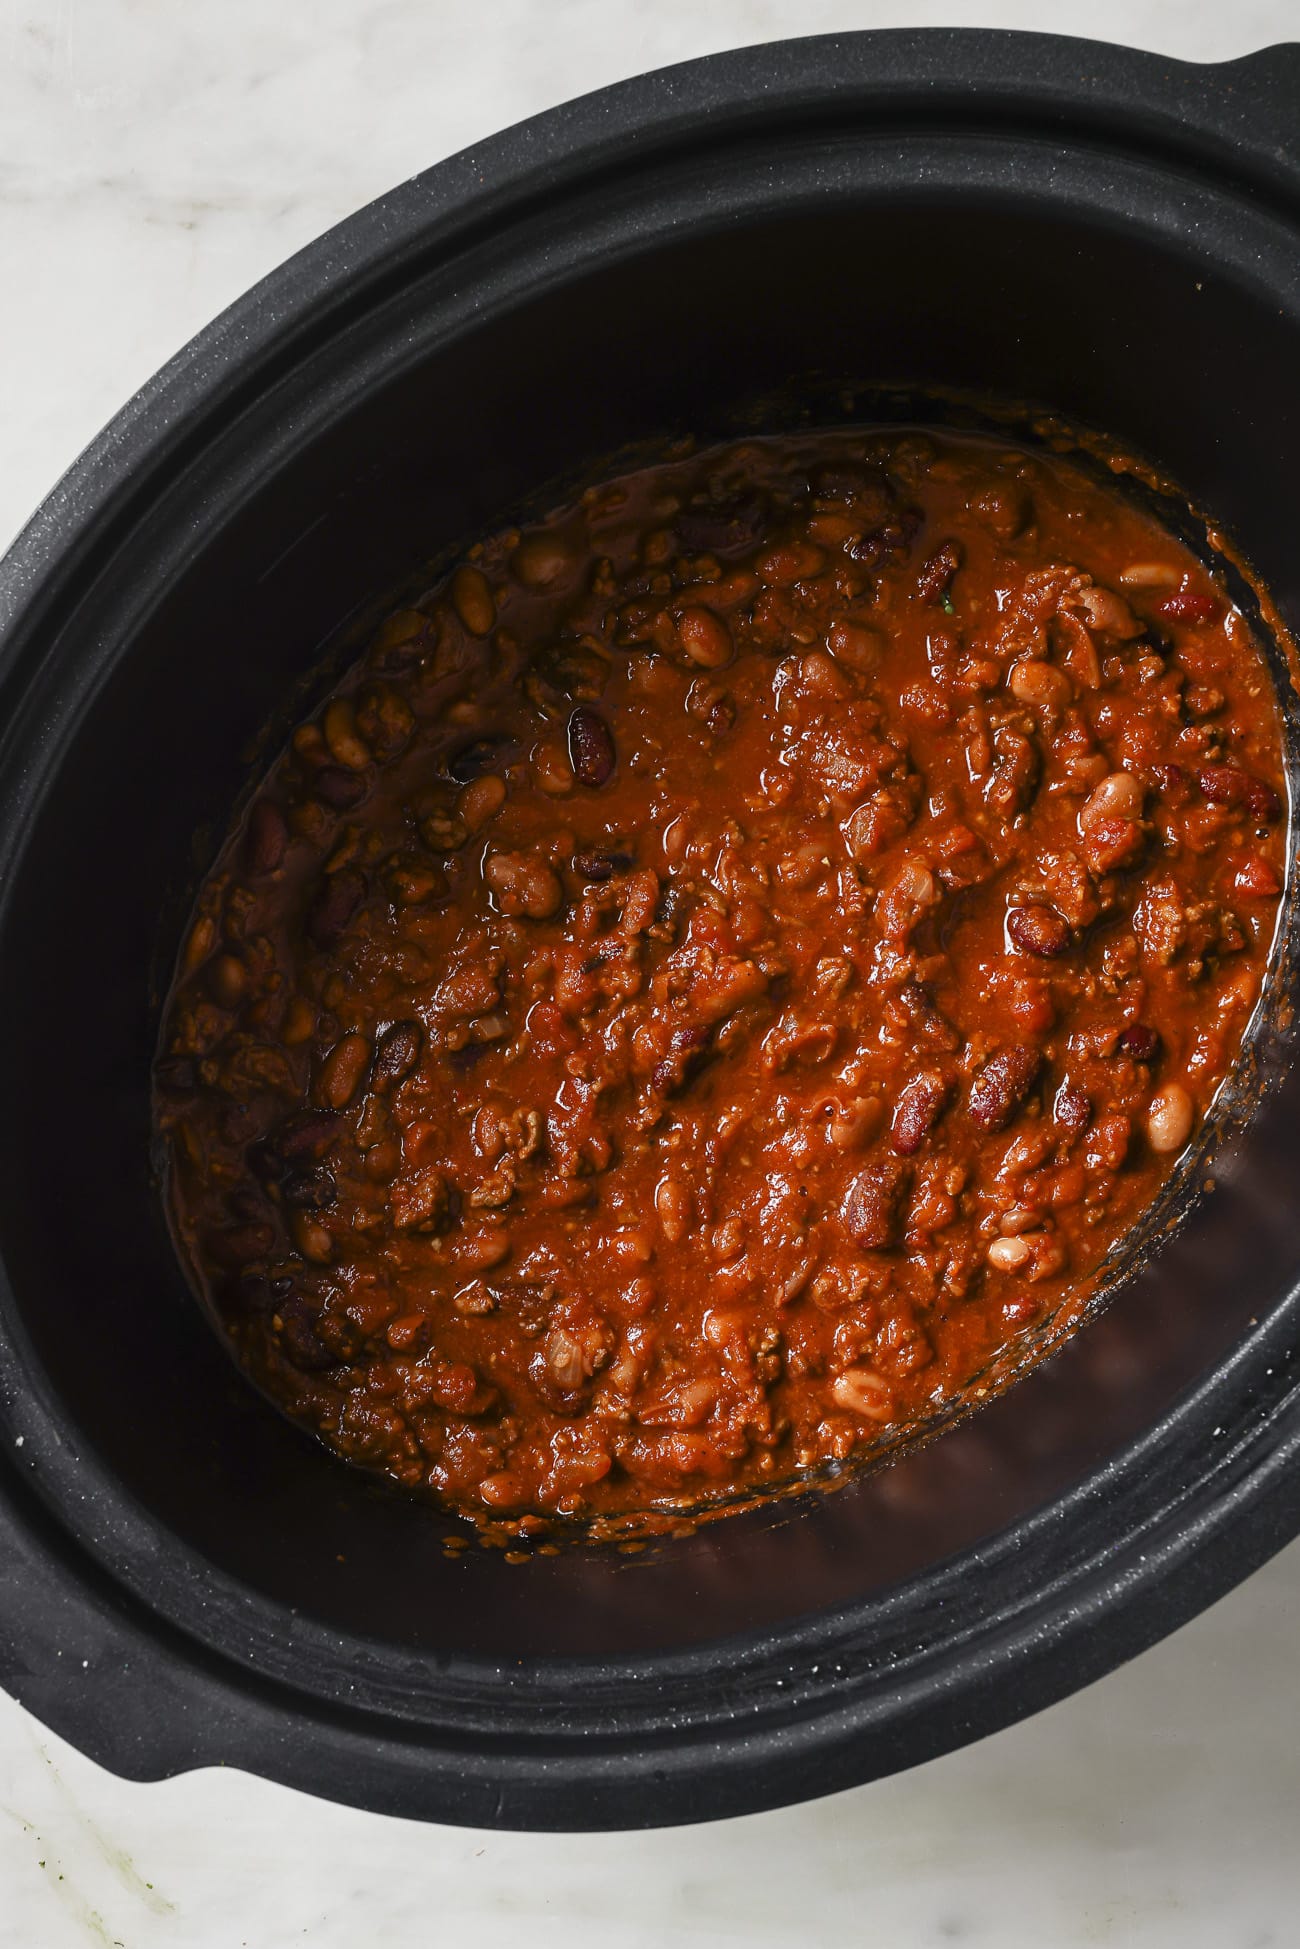 Close up of chili in a slow cooker.